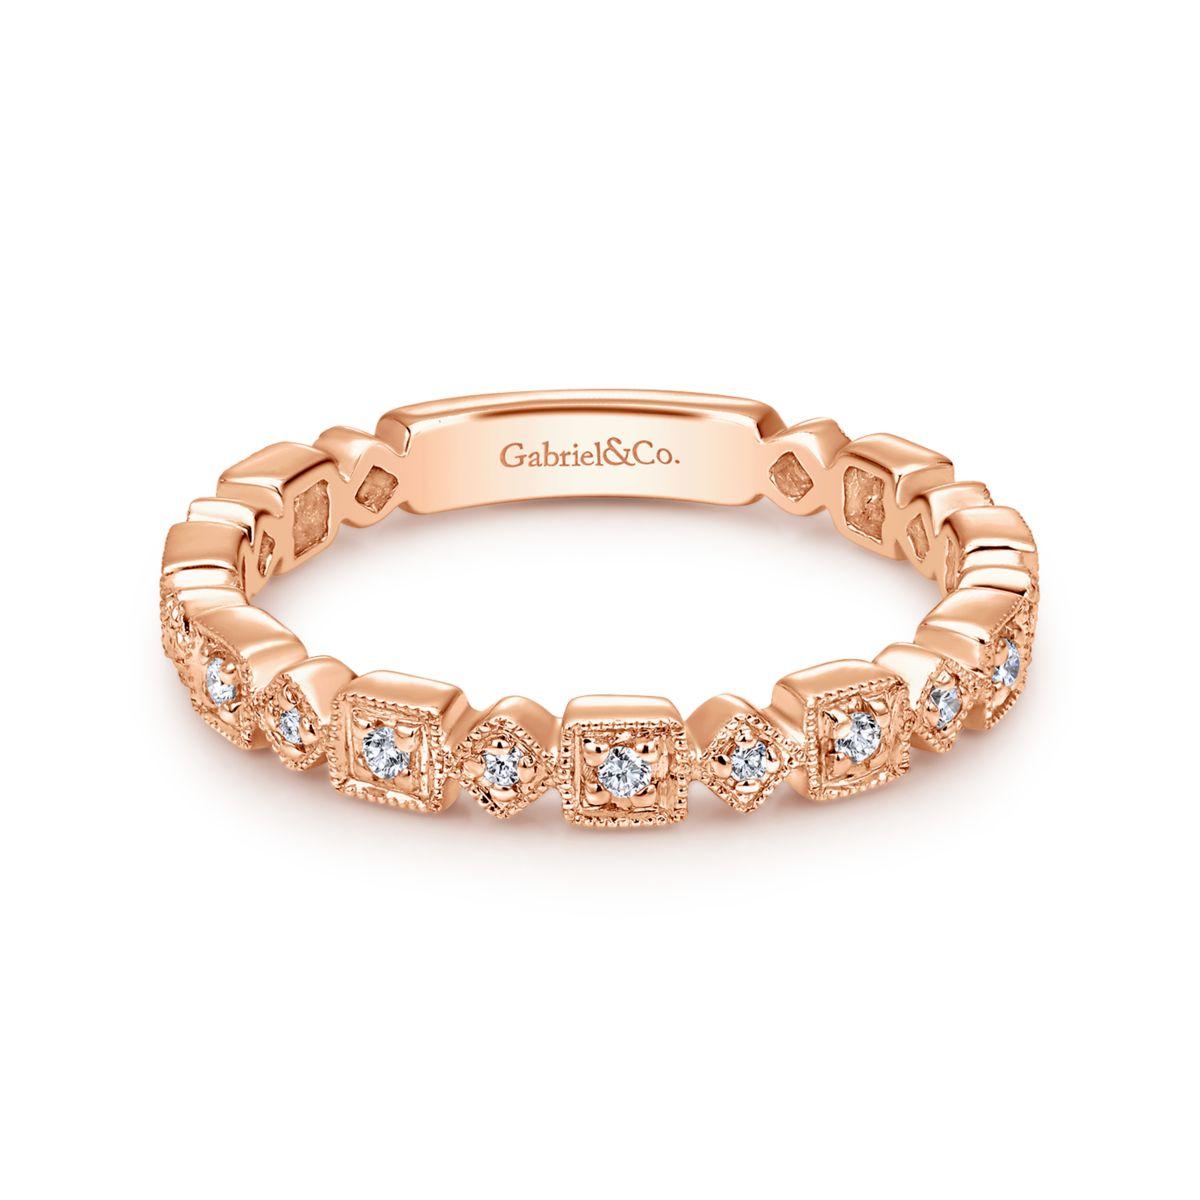 14 KT Stackable Stackable Ring